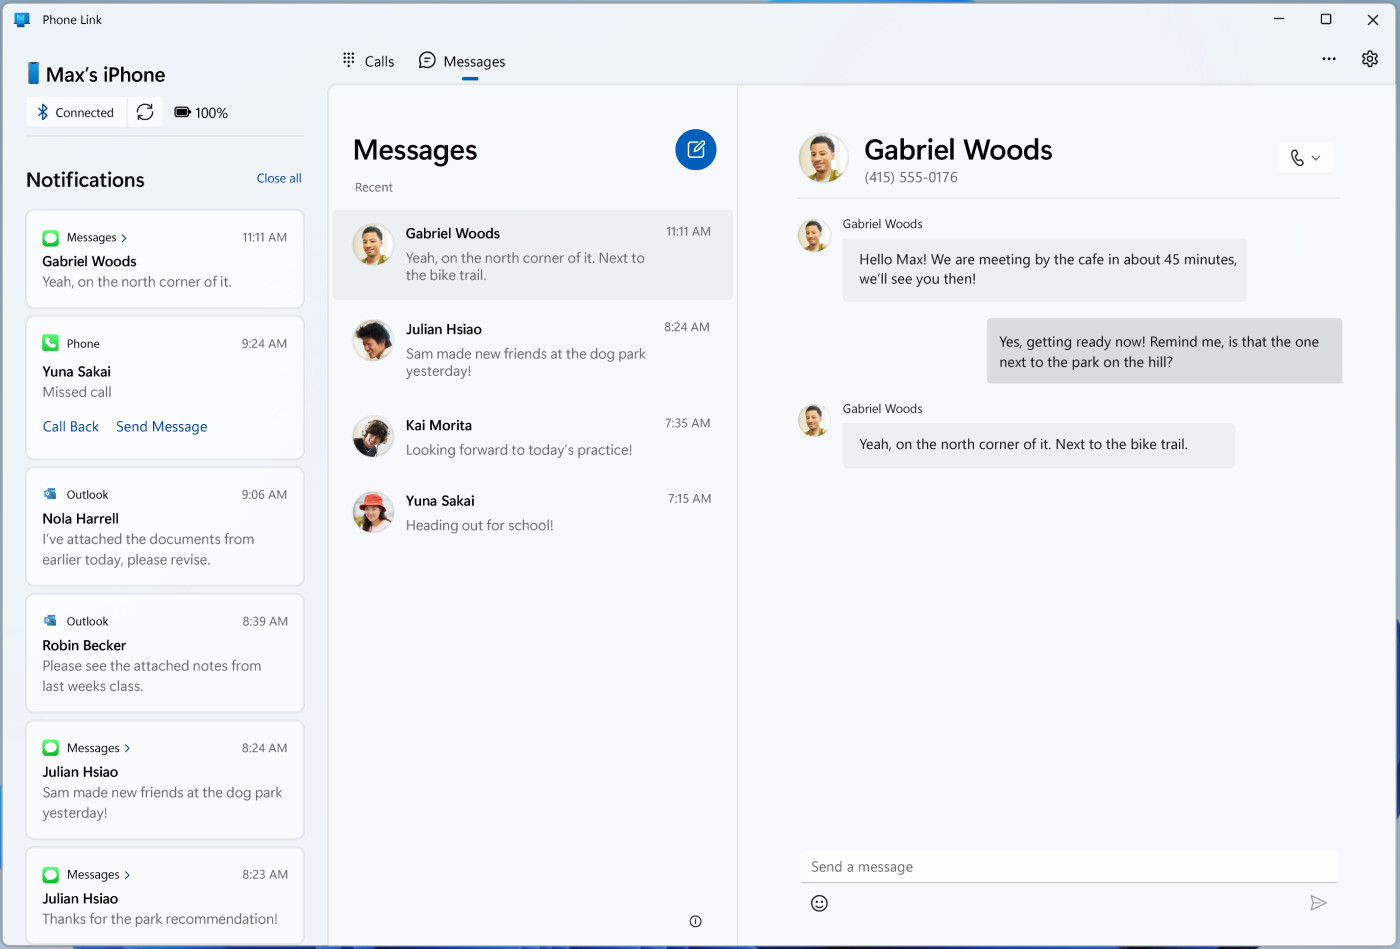 iMessage on Windows PCs becomes available to 100% of users